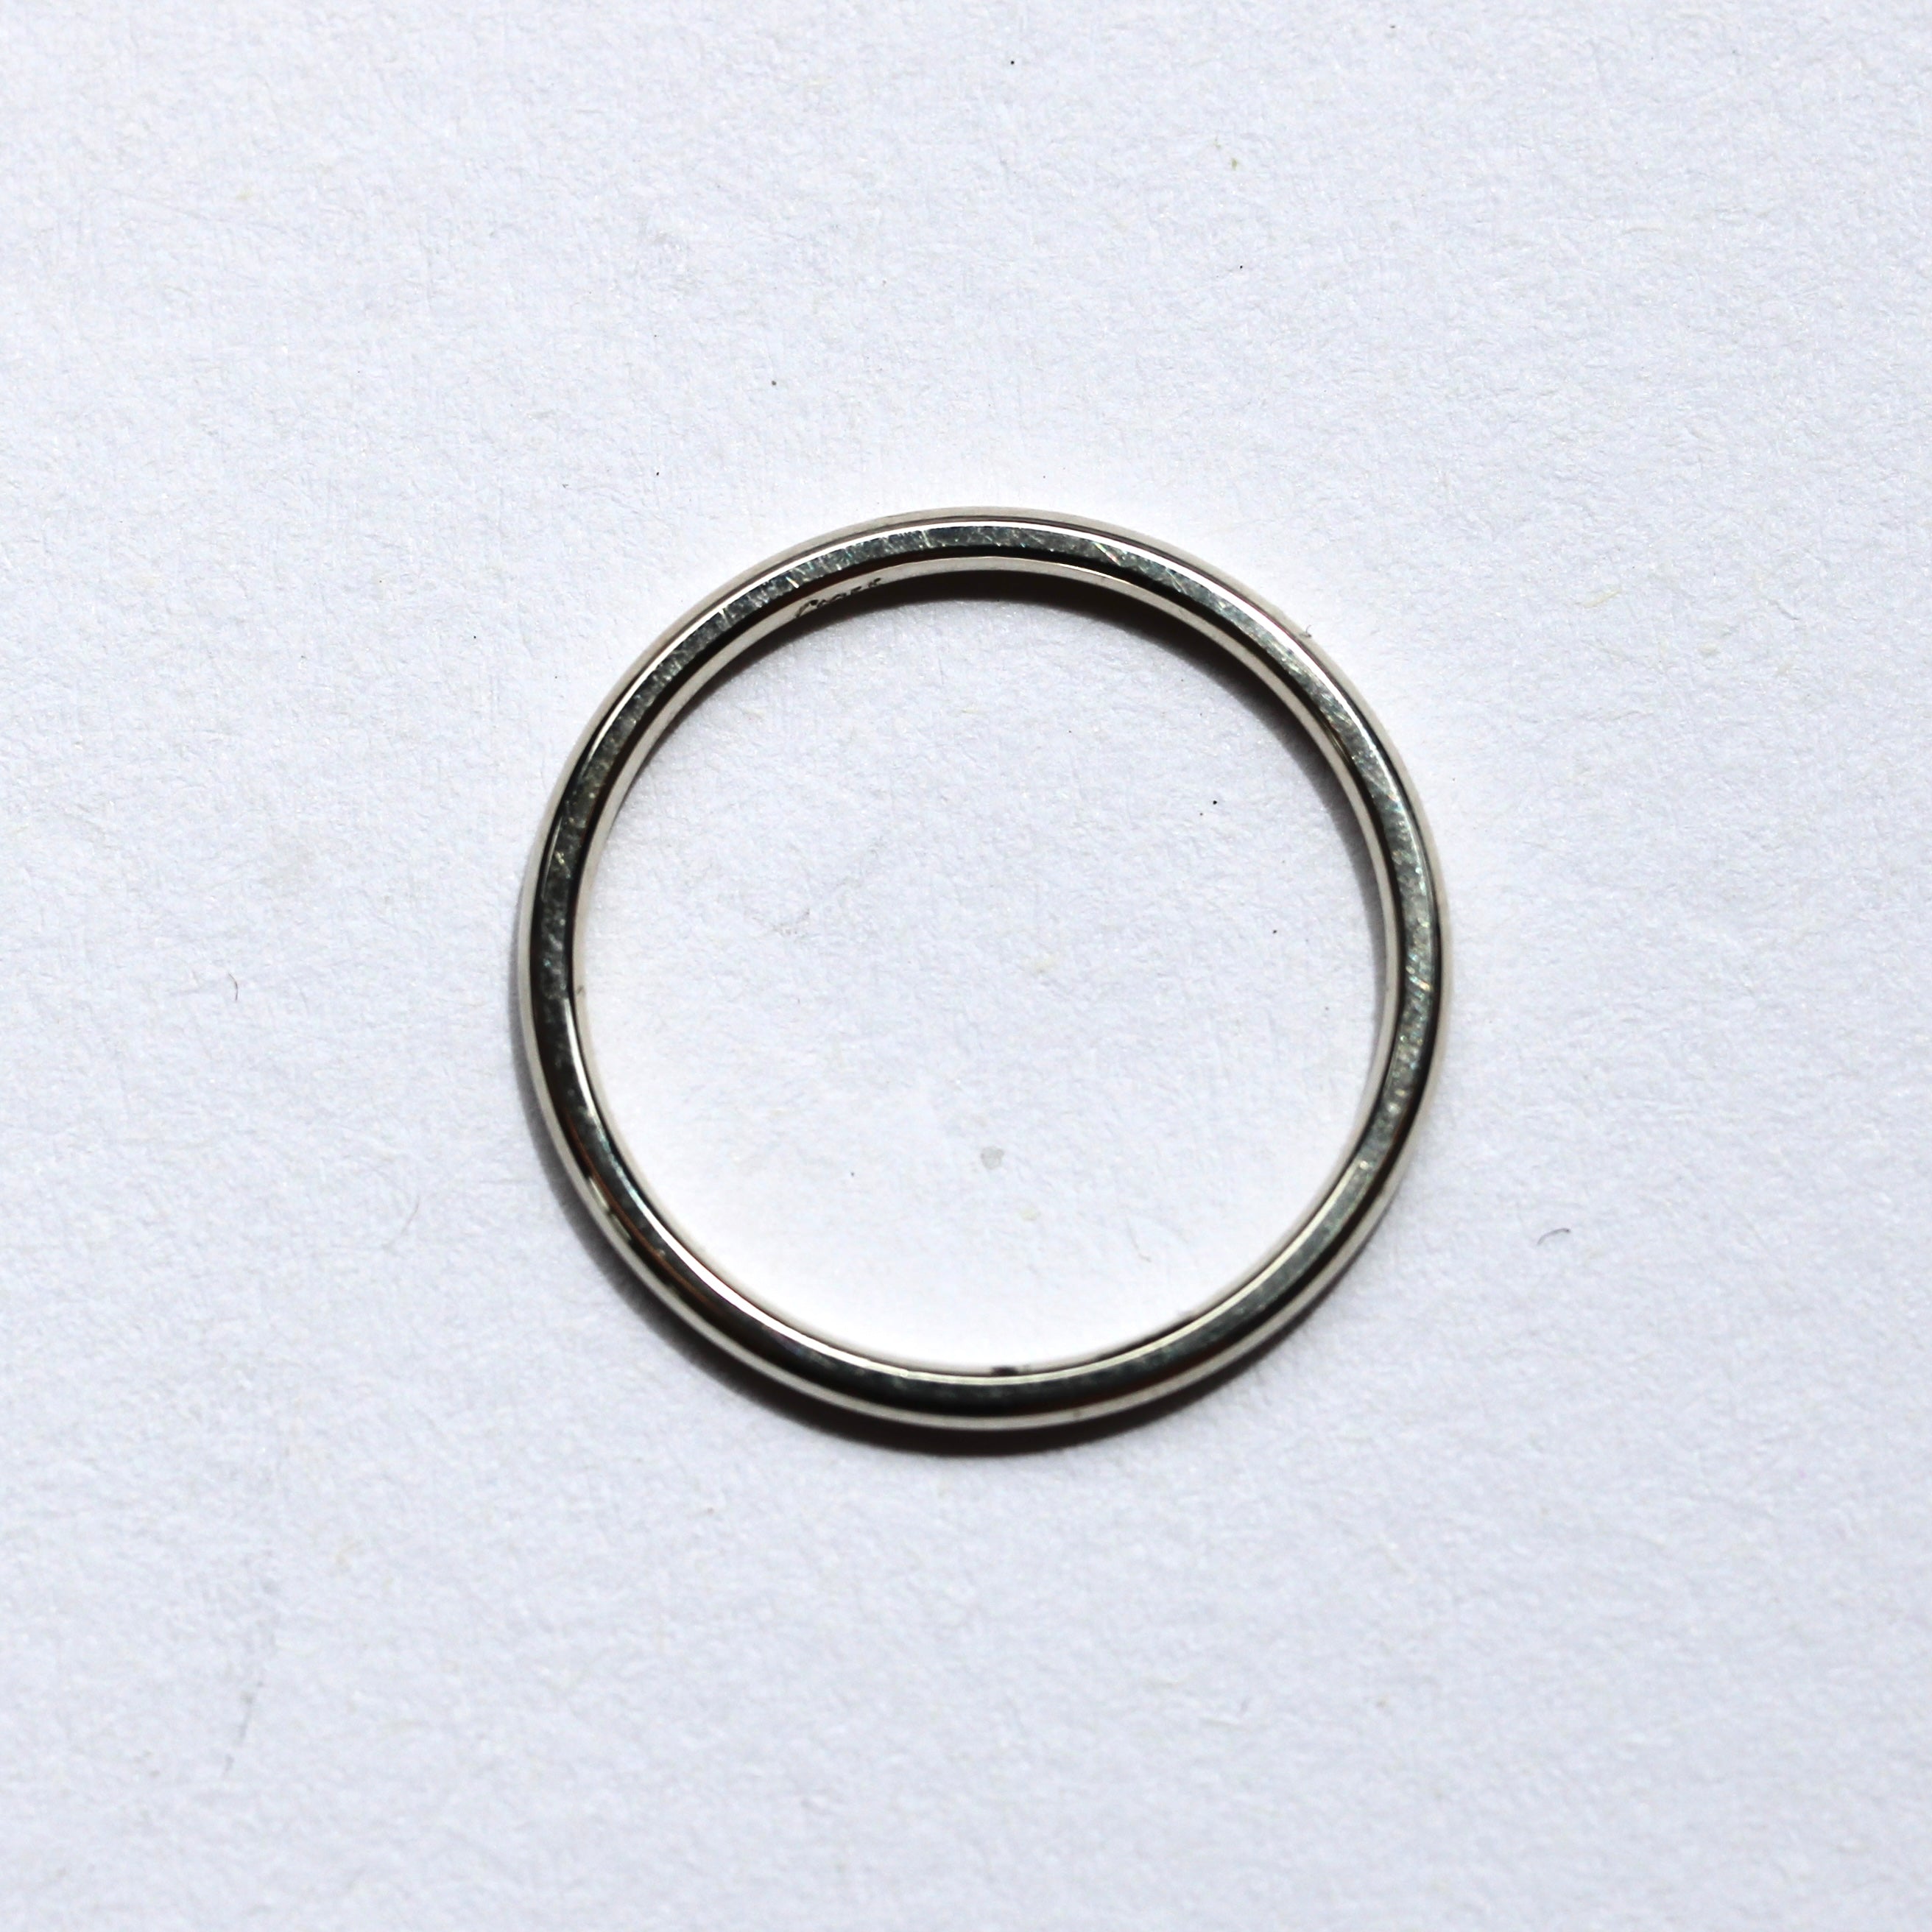 $ALE - 1.5mm wide Rounded Band